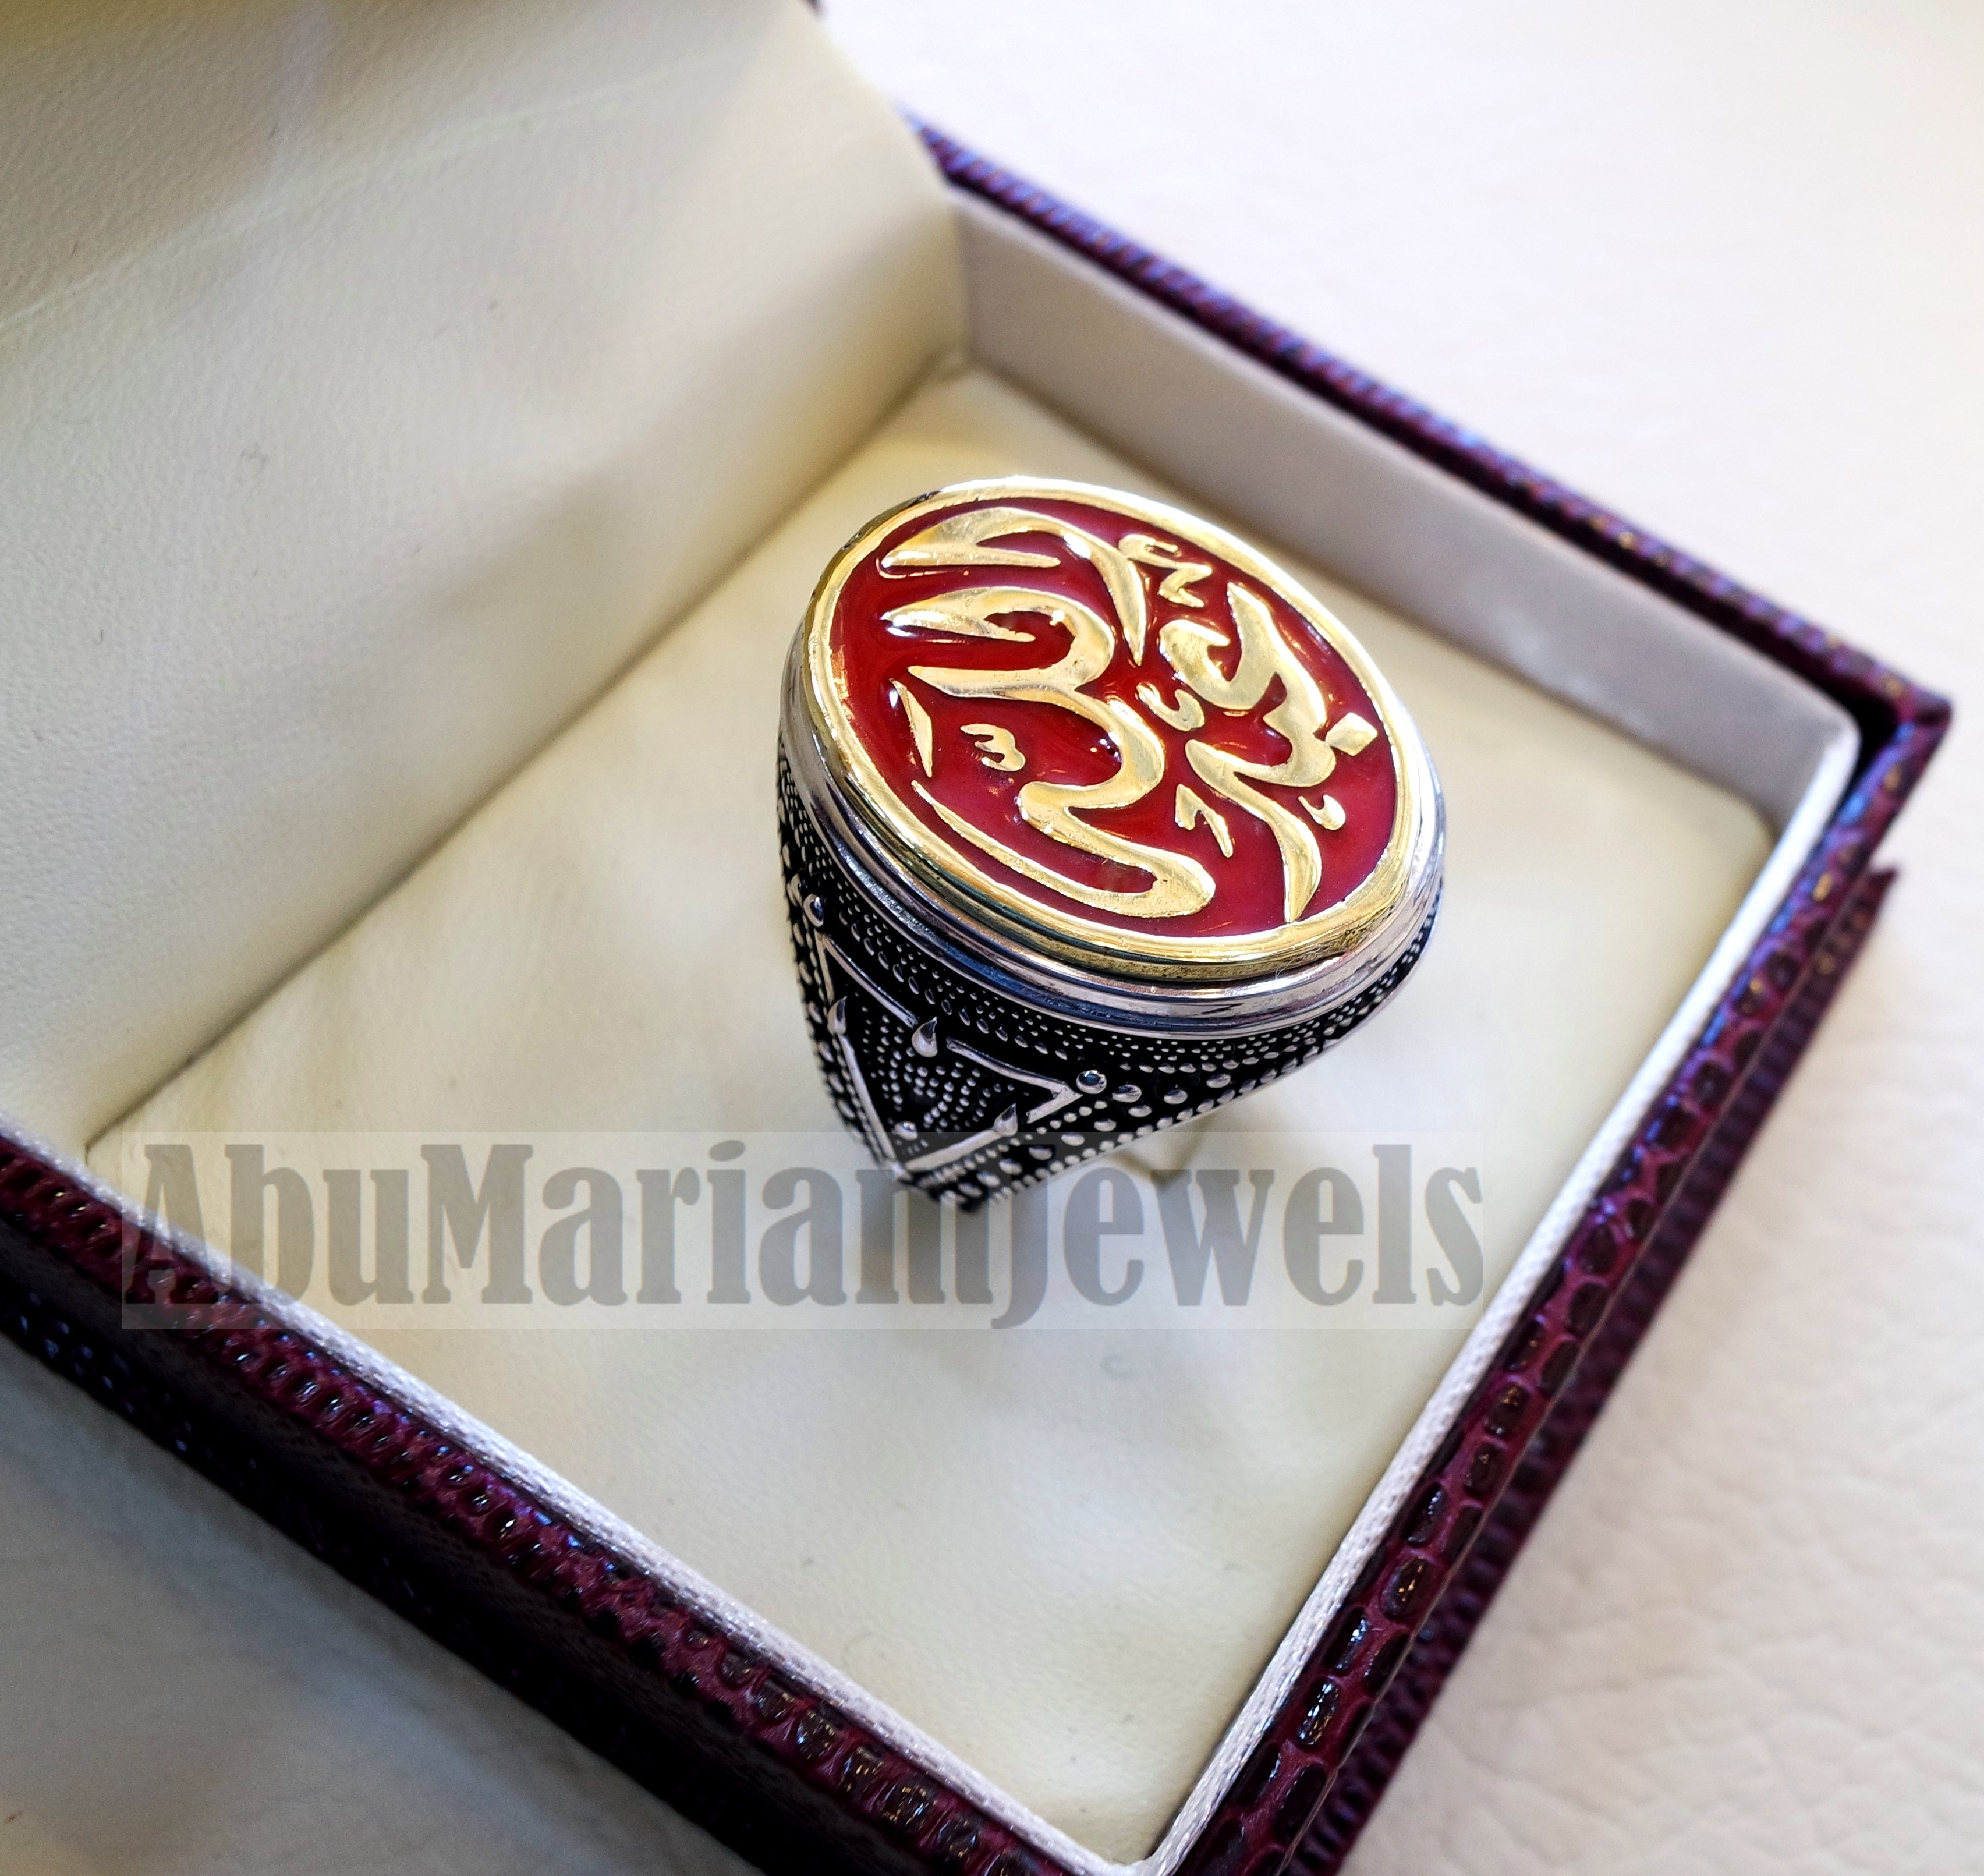 Customized Arabic calligraphy names ring personalized sterling silver 925 and bronze with red enamel TSE1001 خاتم اسم تفصيل